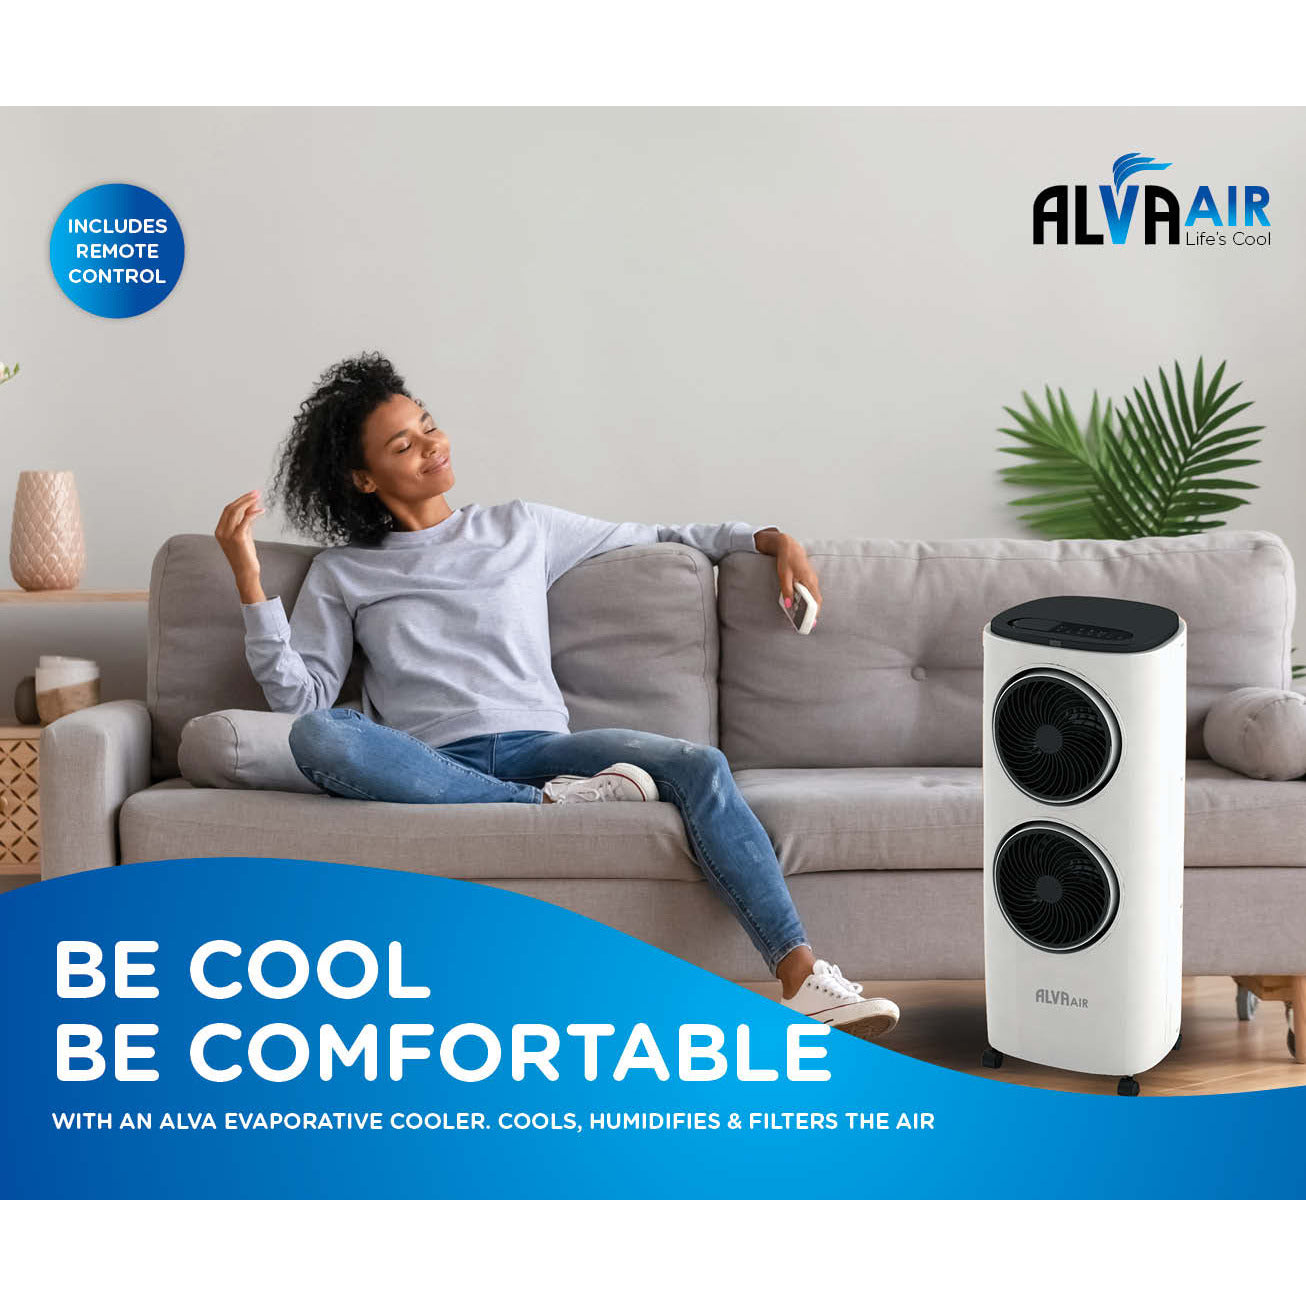 TWIN FAN EVAPORATIVE AIR COOLER WITH REMOTE CONTROL